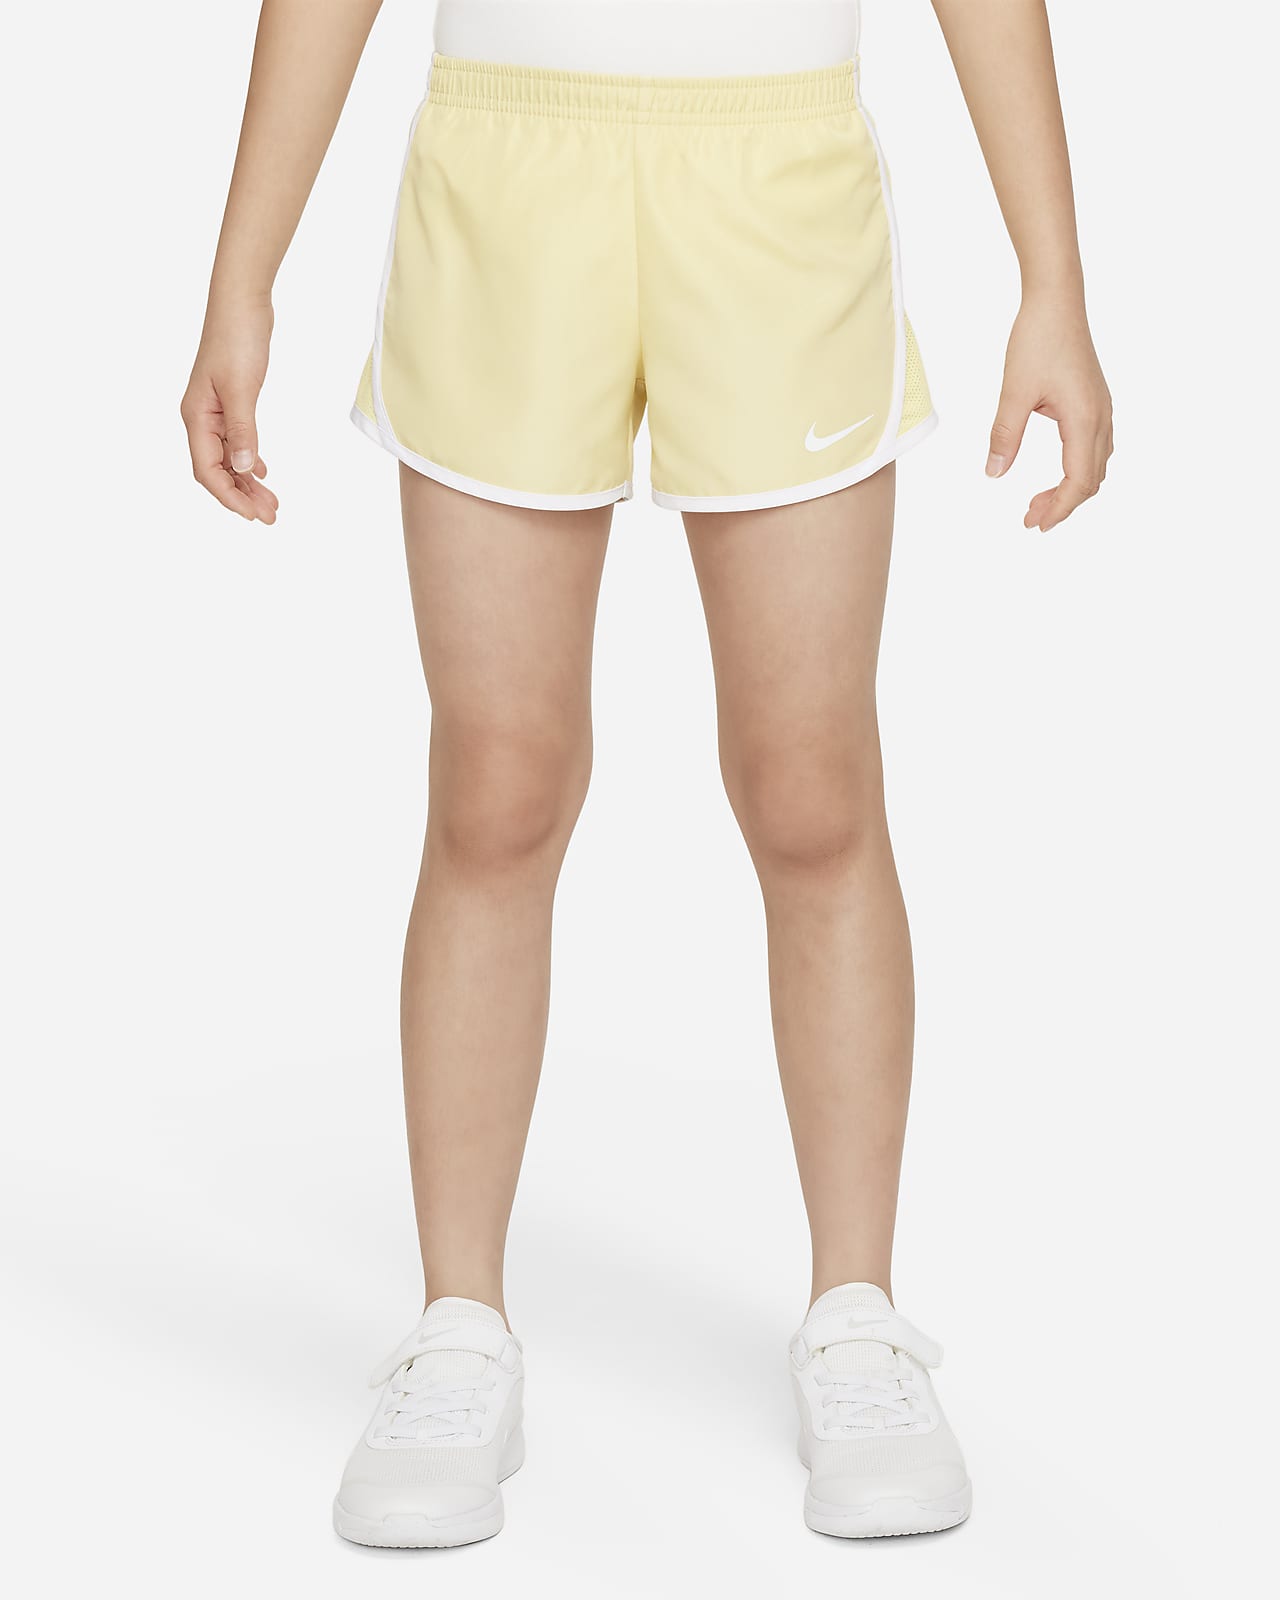 Tempo Shorts - Kids by Nike Online, THE ICONIC